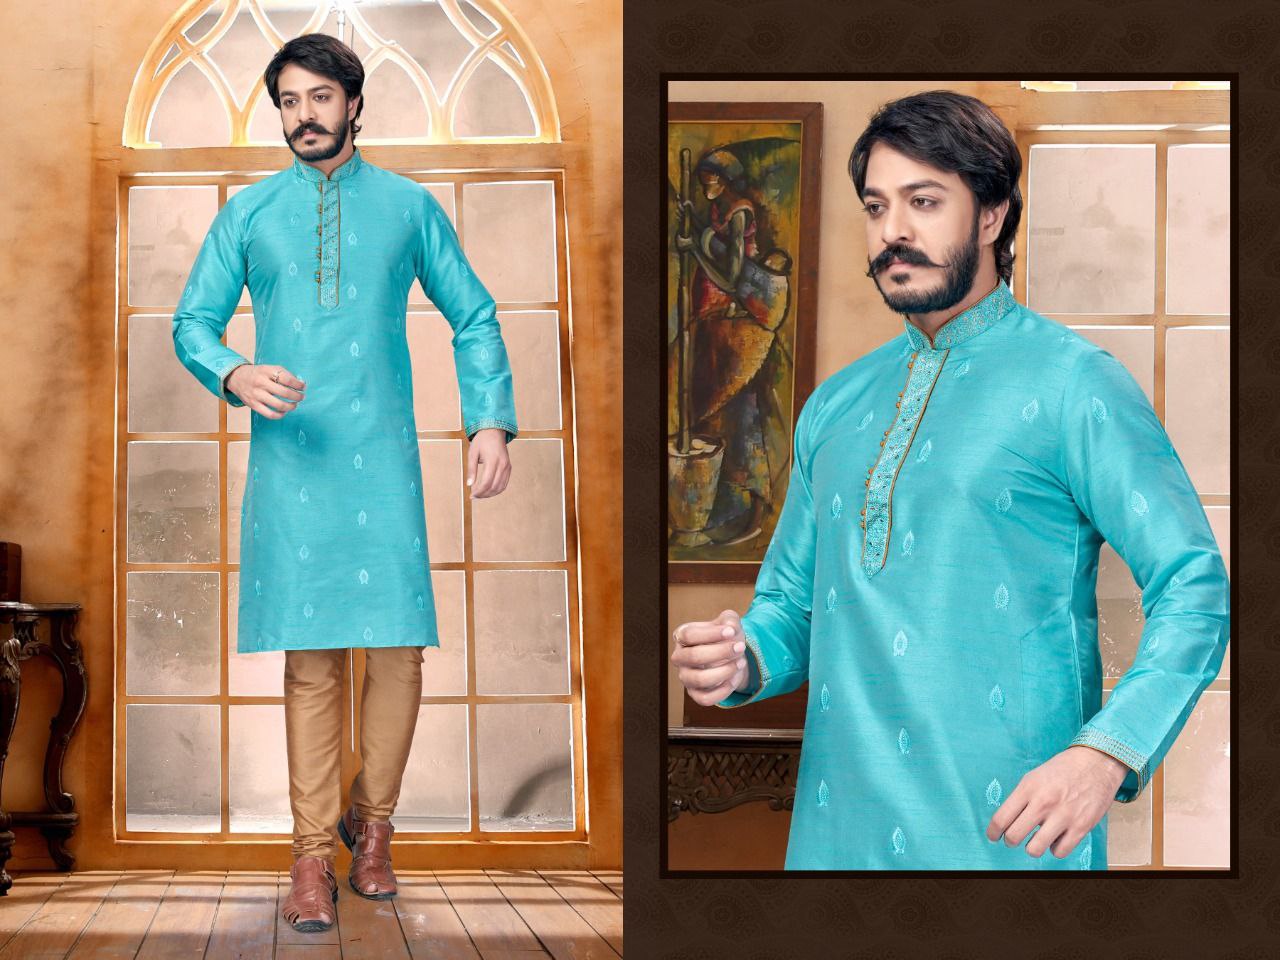 Sky Blue color Designed Butti Embroidery Work Sherwani with Pant in Flagstaff